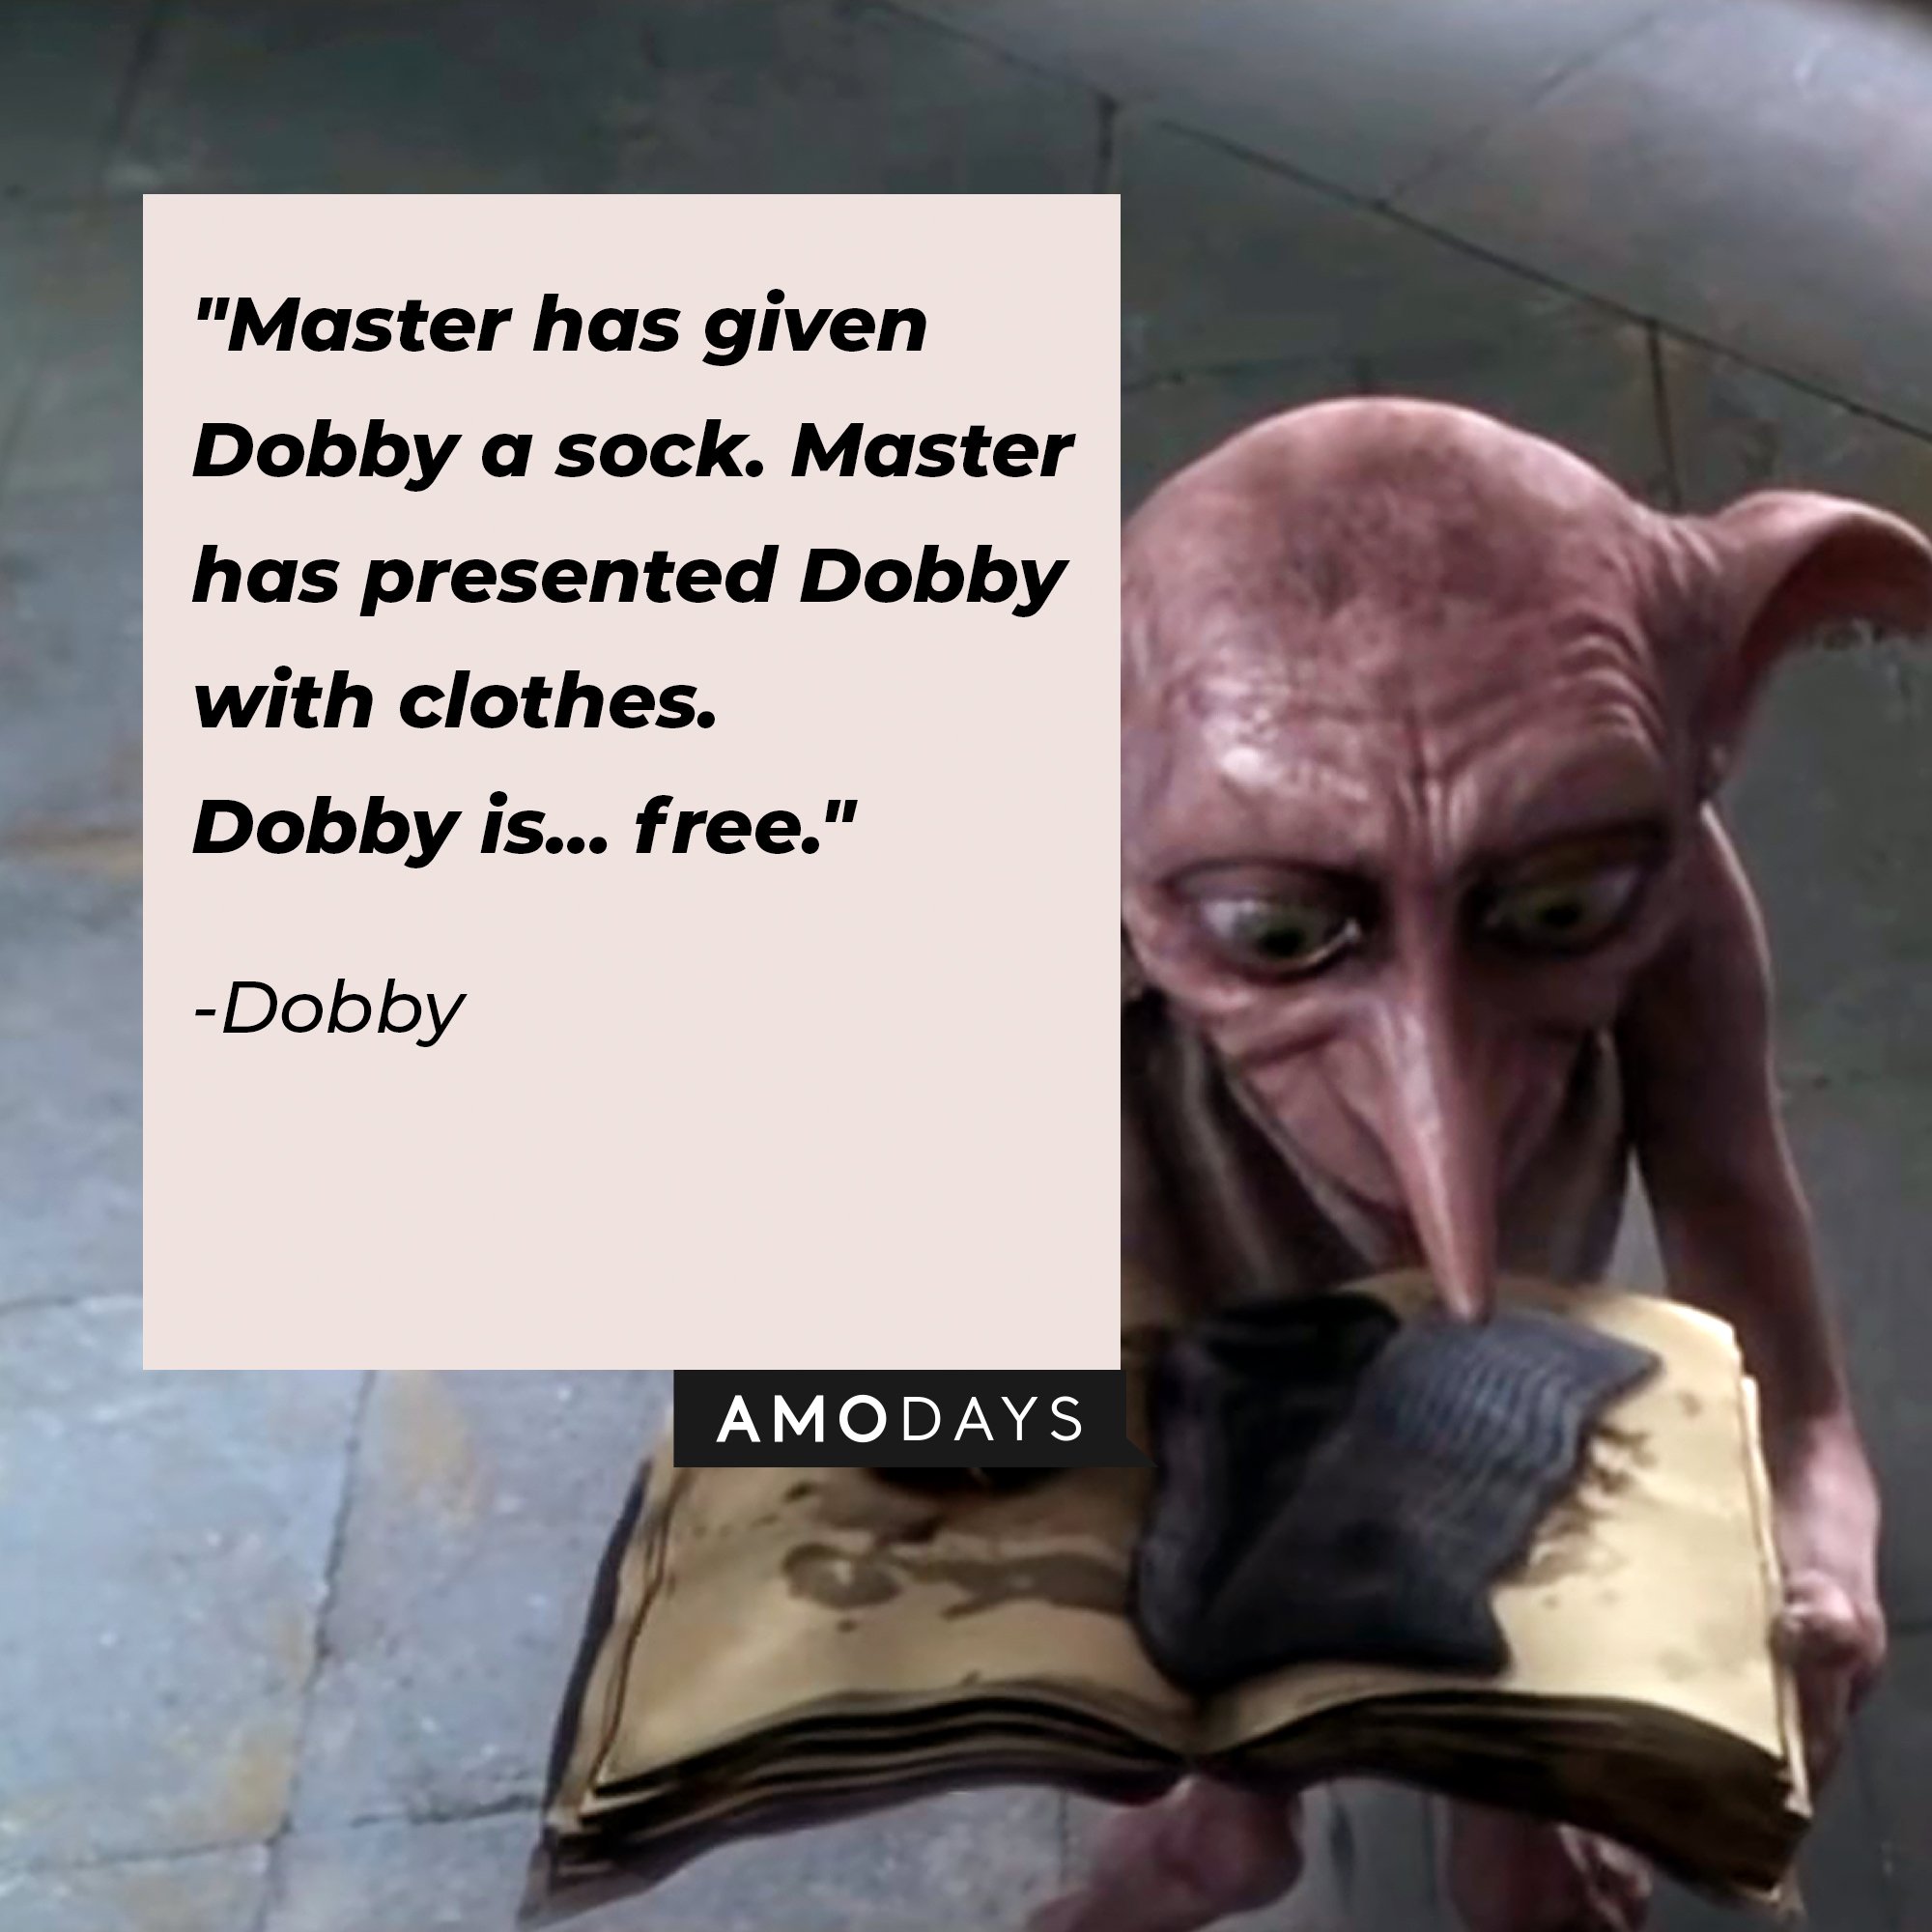  Dobby’s quote: "Master has given Dobby a sock. Master has presented Dobby with clothes. Dobby is… free." | Image: AmoDays